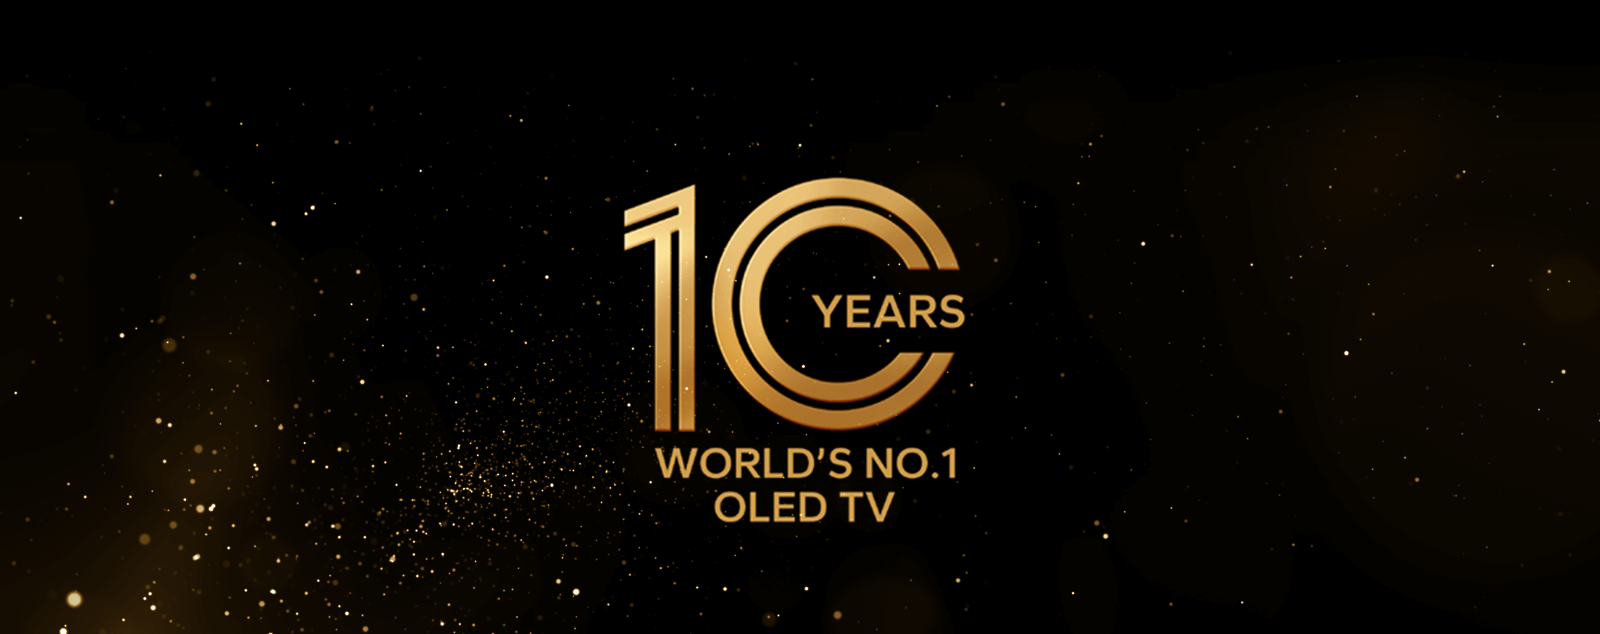 10 Years Worlds number 1 OLED TV